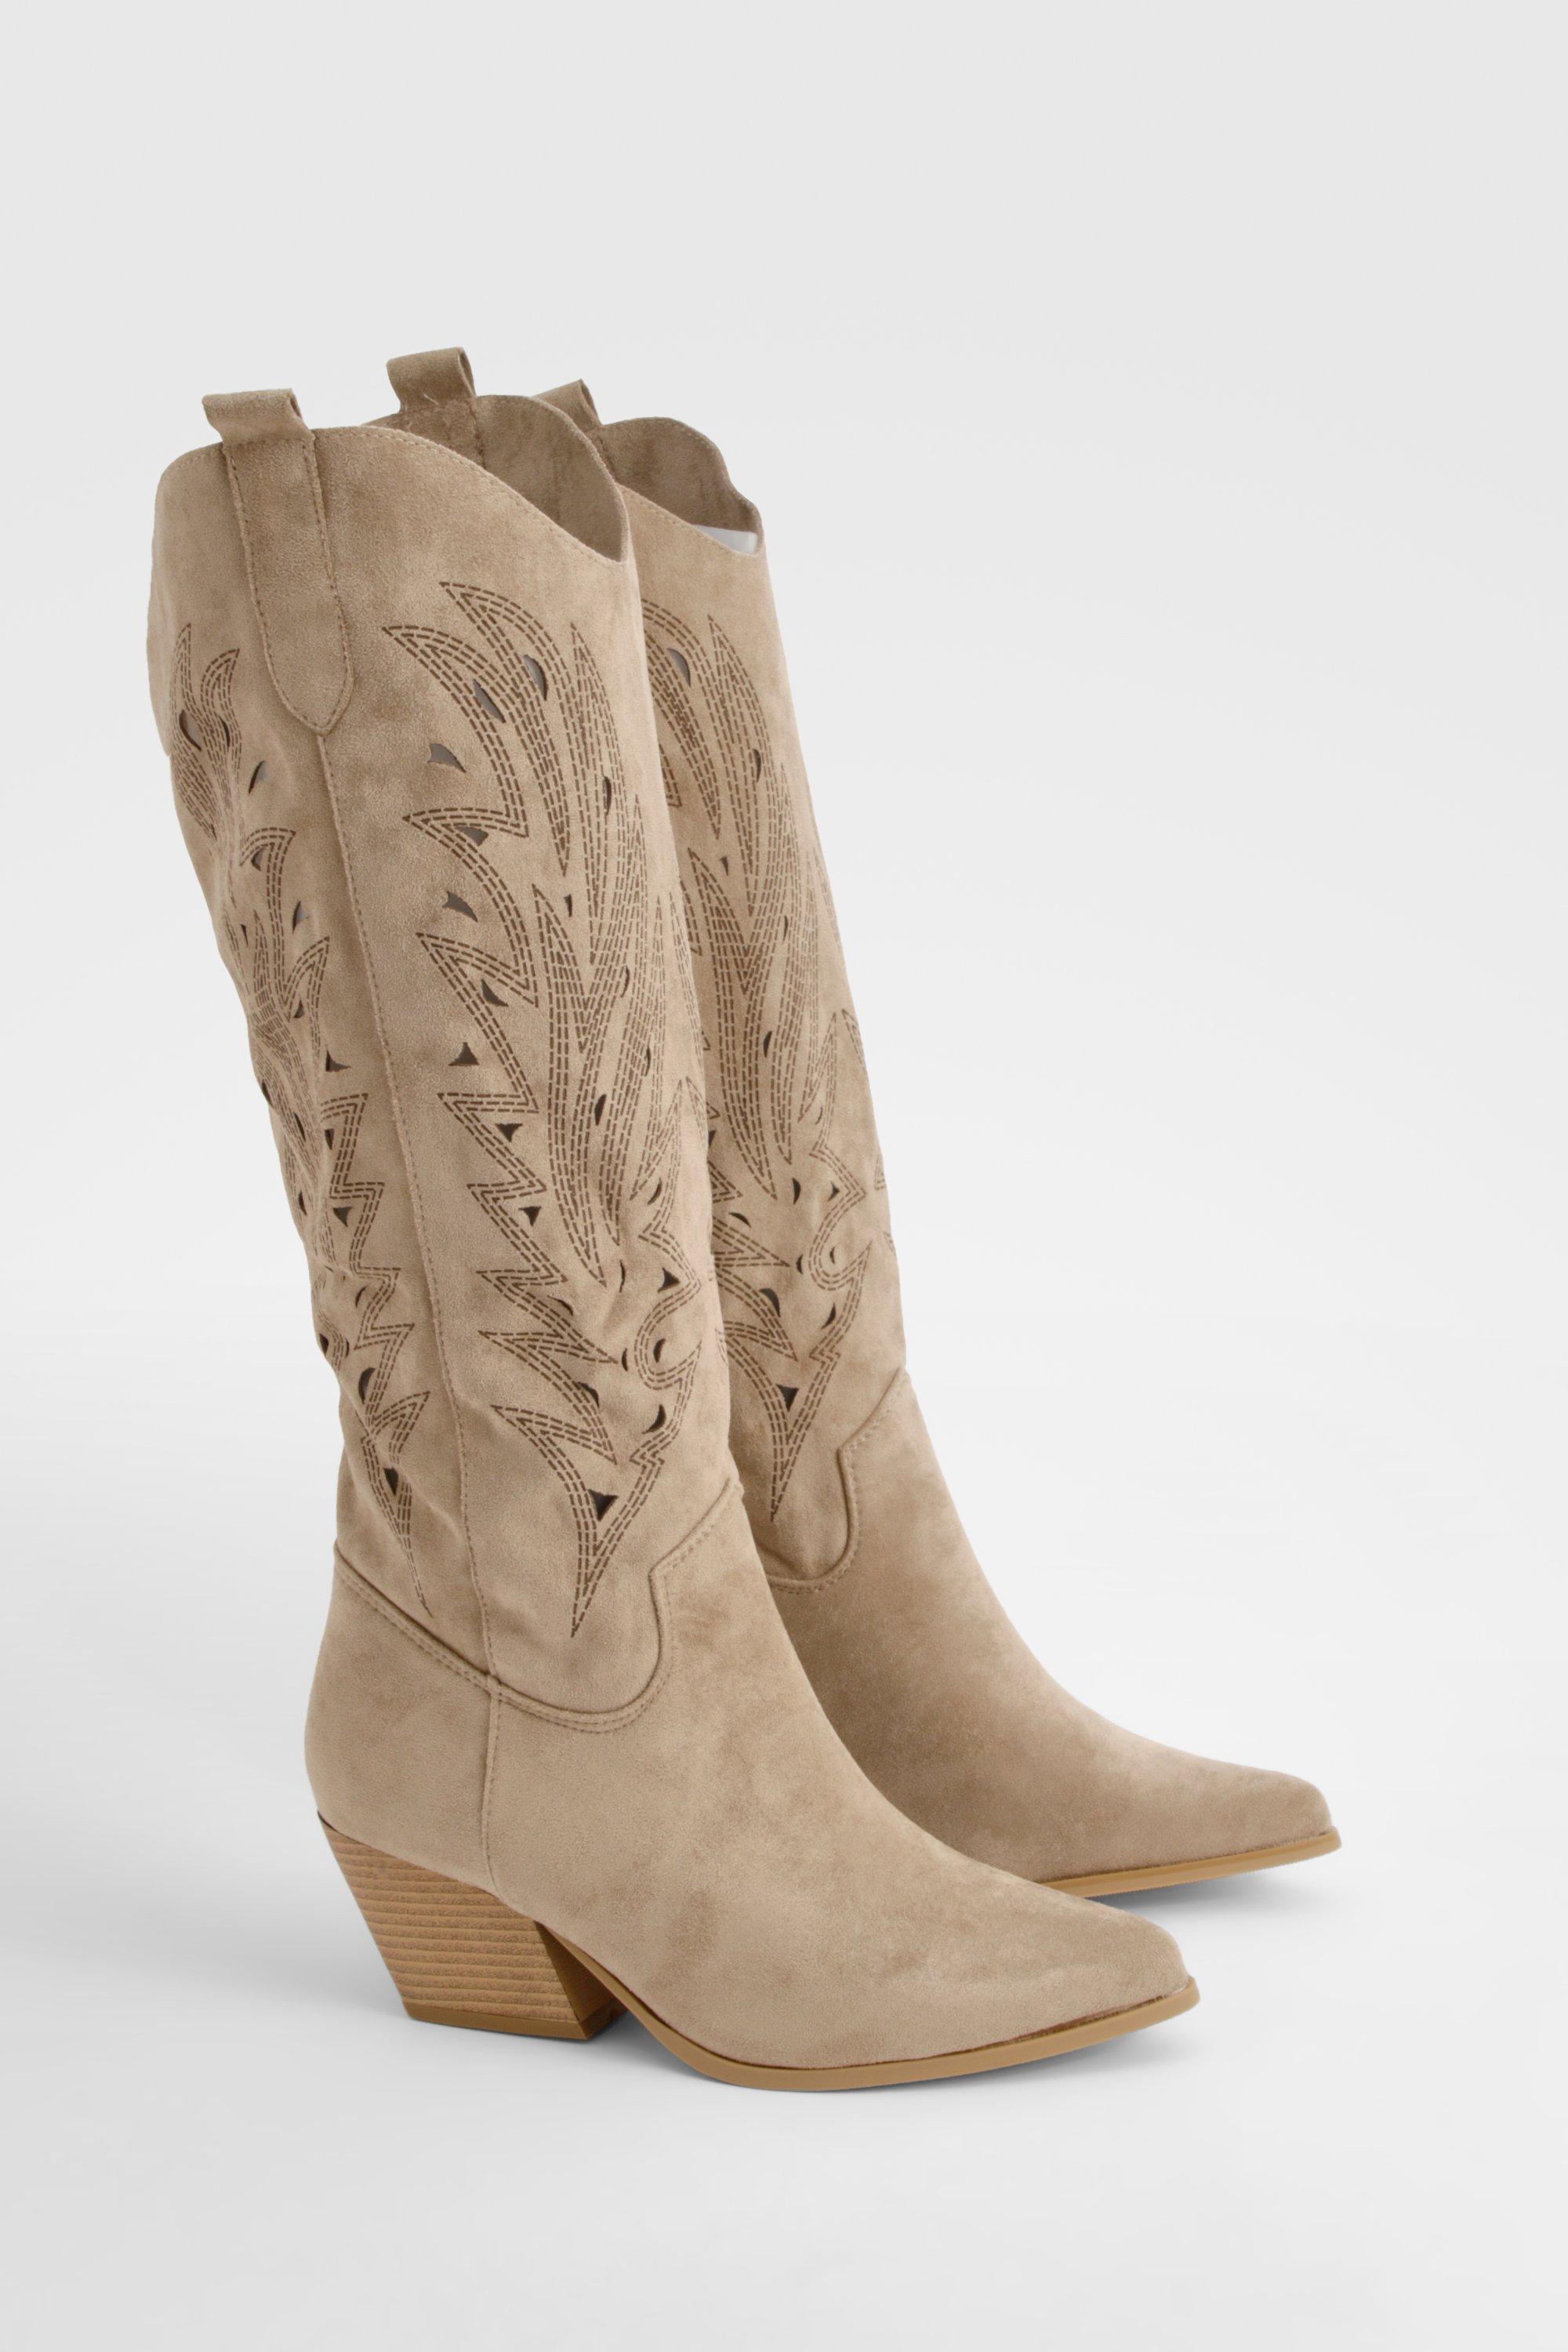 Boohoo Embroidered Cut Knee High Western Boots, Taupe